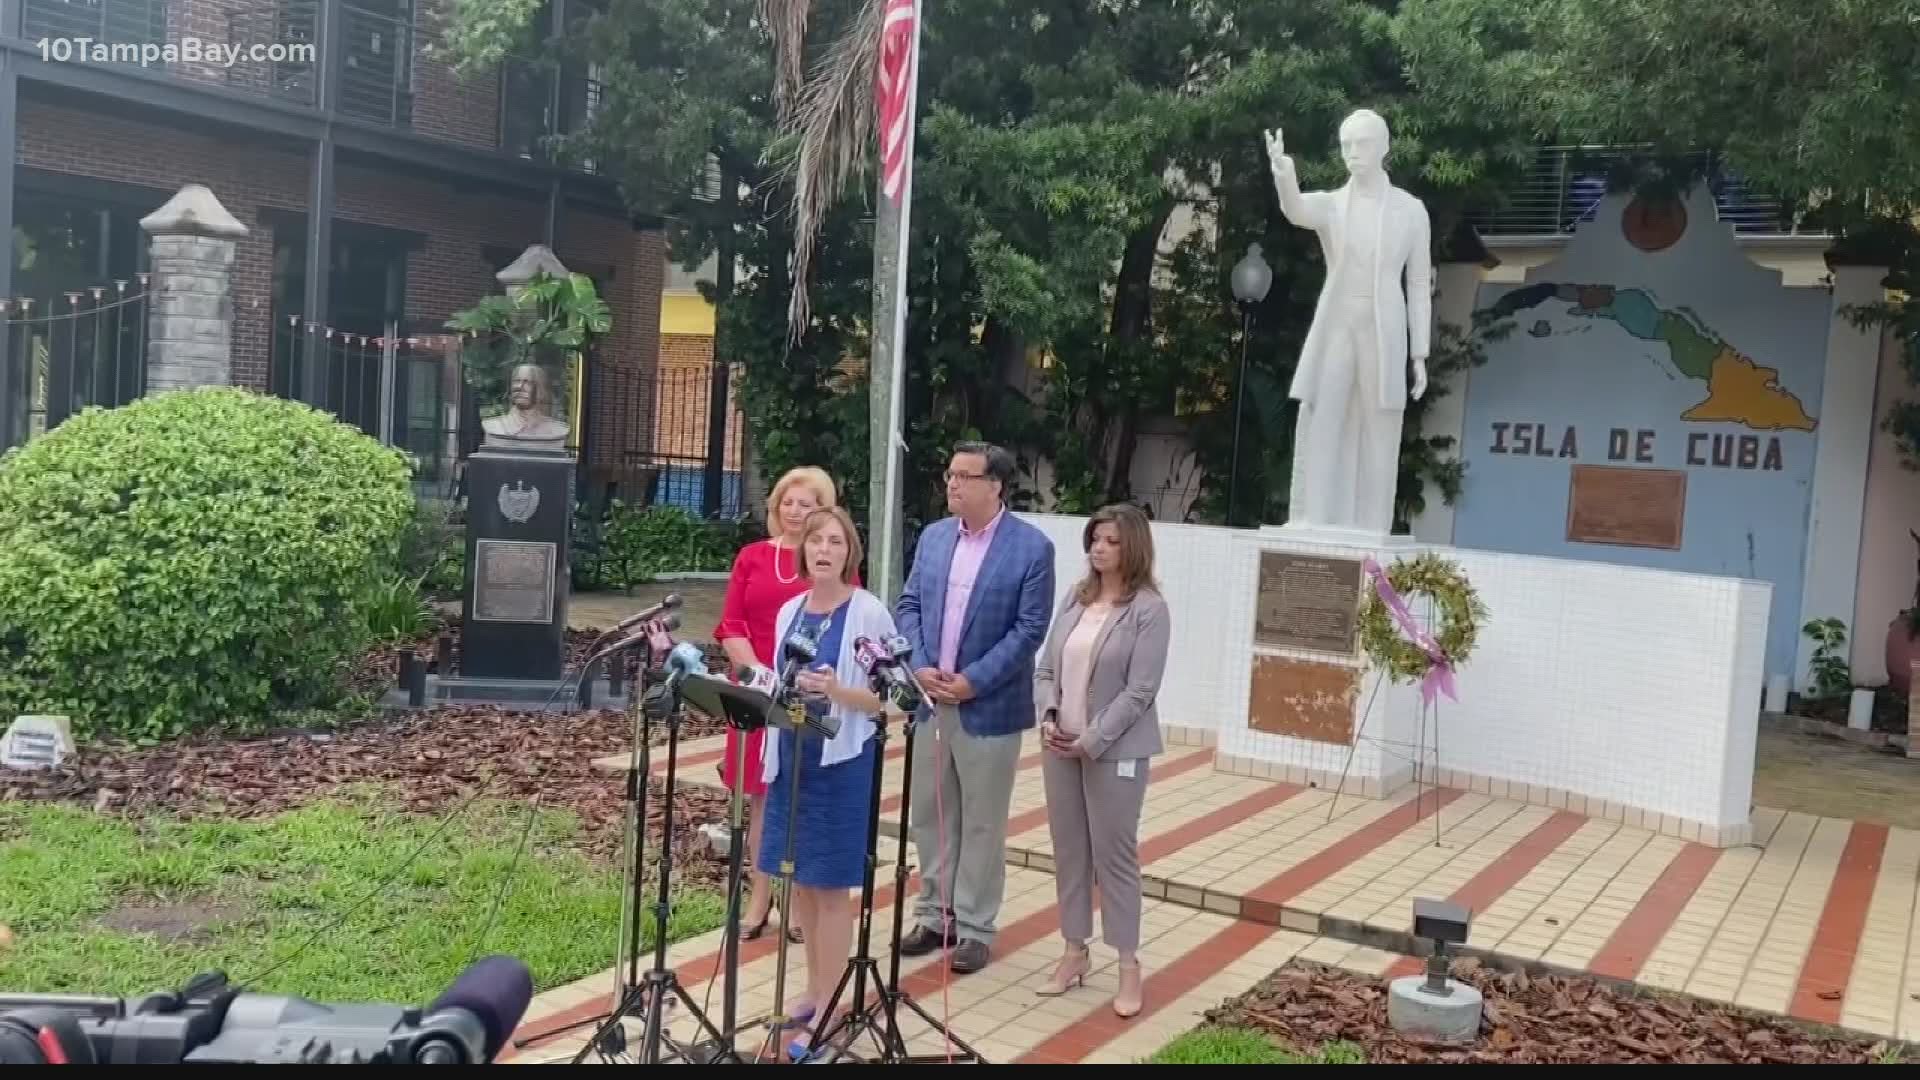 Rep. Castor spoke in solidarity with the Cuban people Wednesday at José Martí park in Tampa.